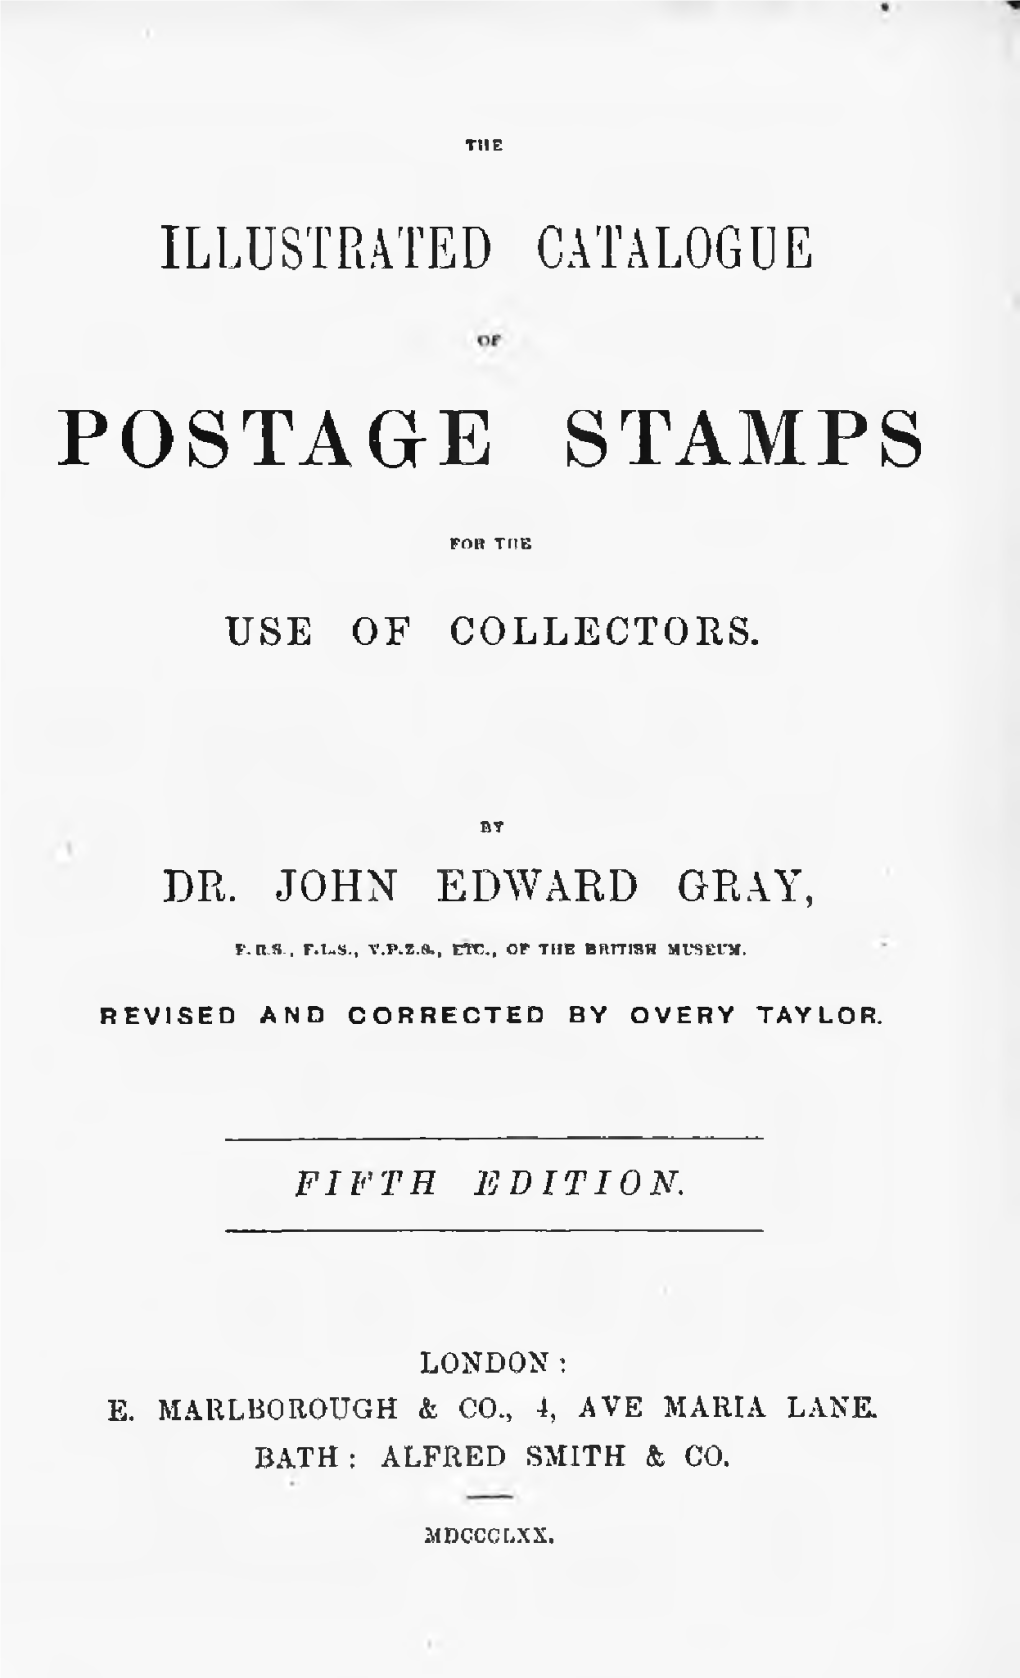 The Illustrated Catalogue of Postage Stamps